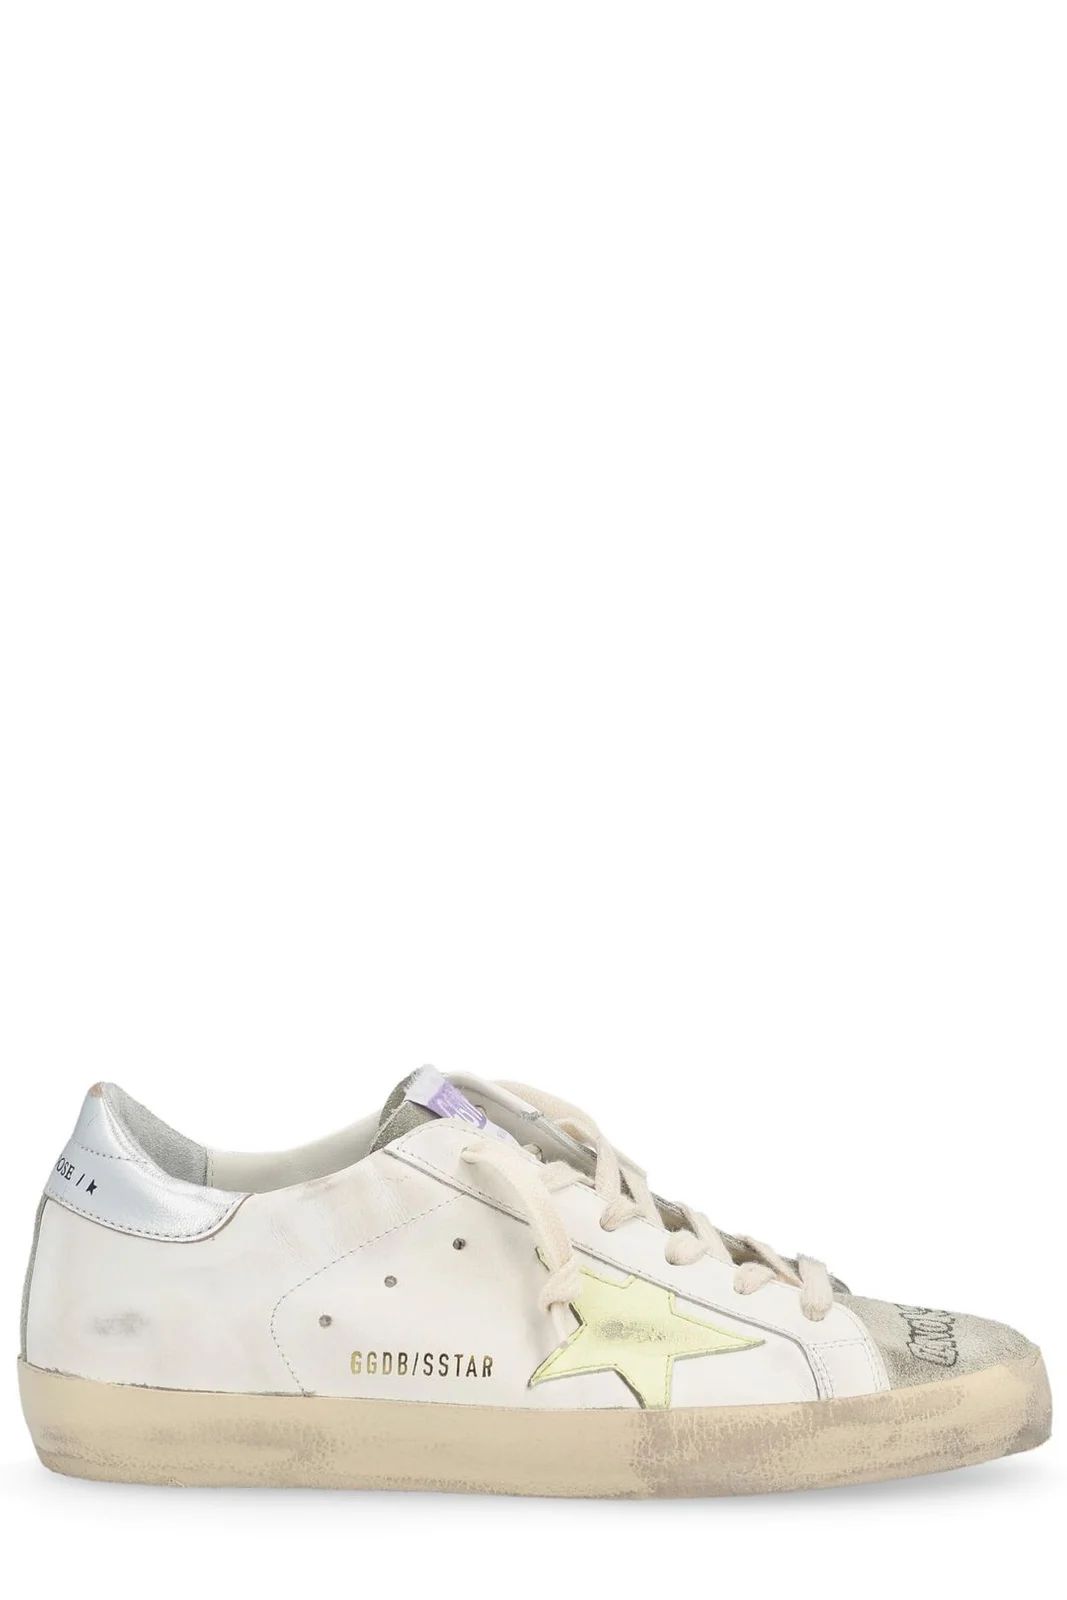 Golden Goose Deluxe Brand Superstar Lace-Up Sneakers – Cettire | Cettire Global